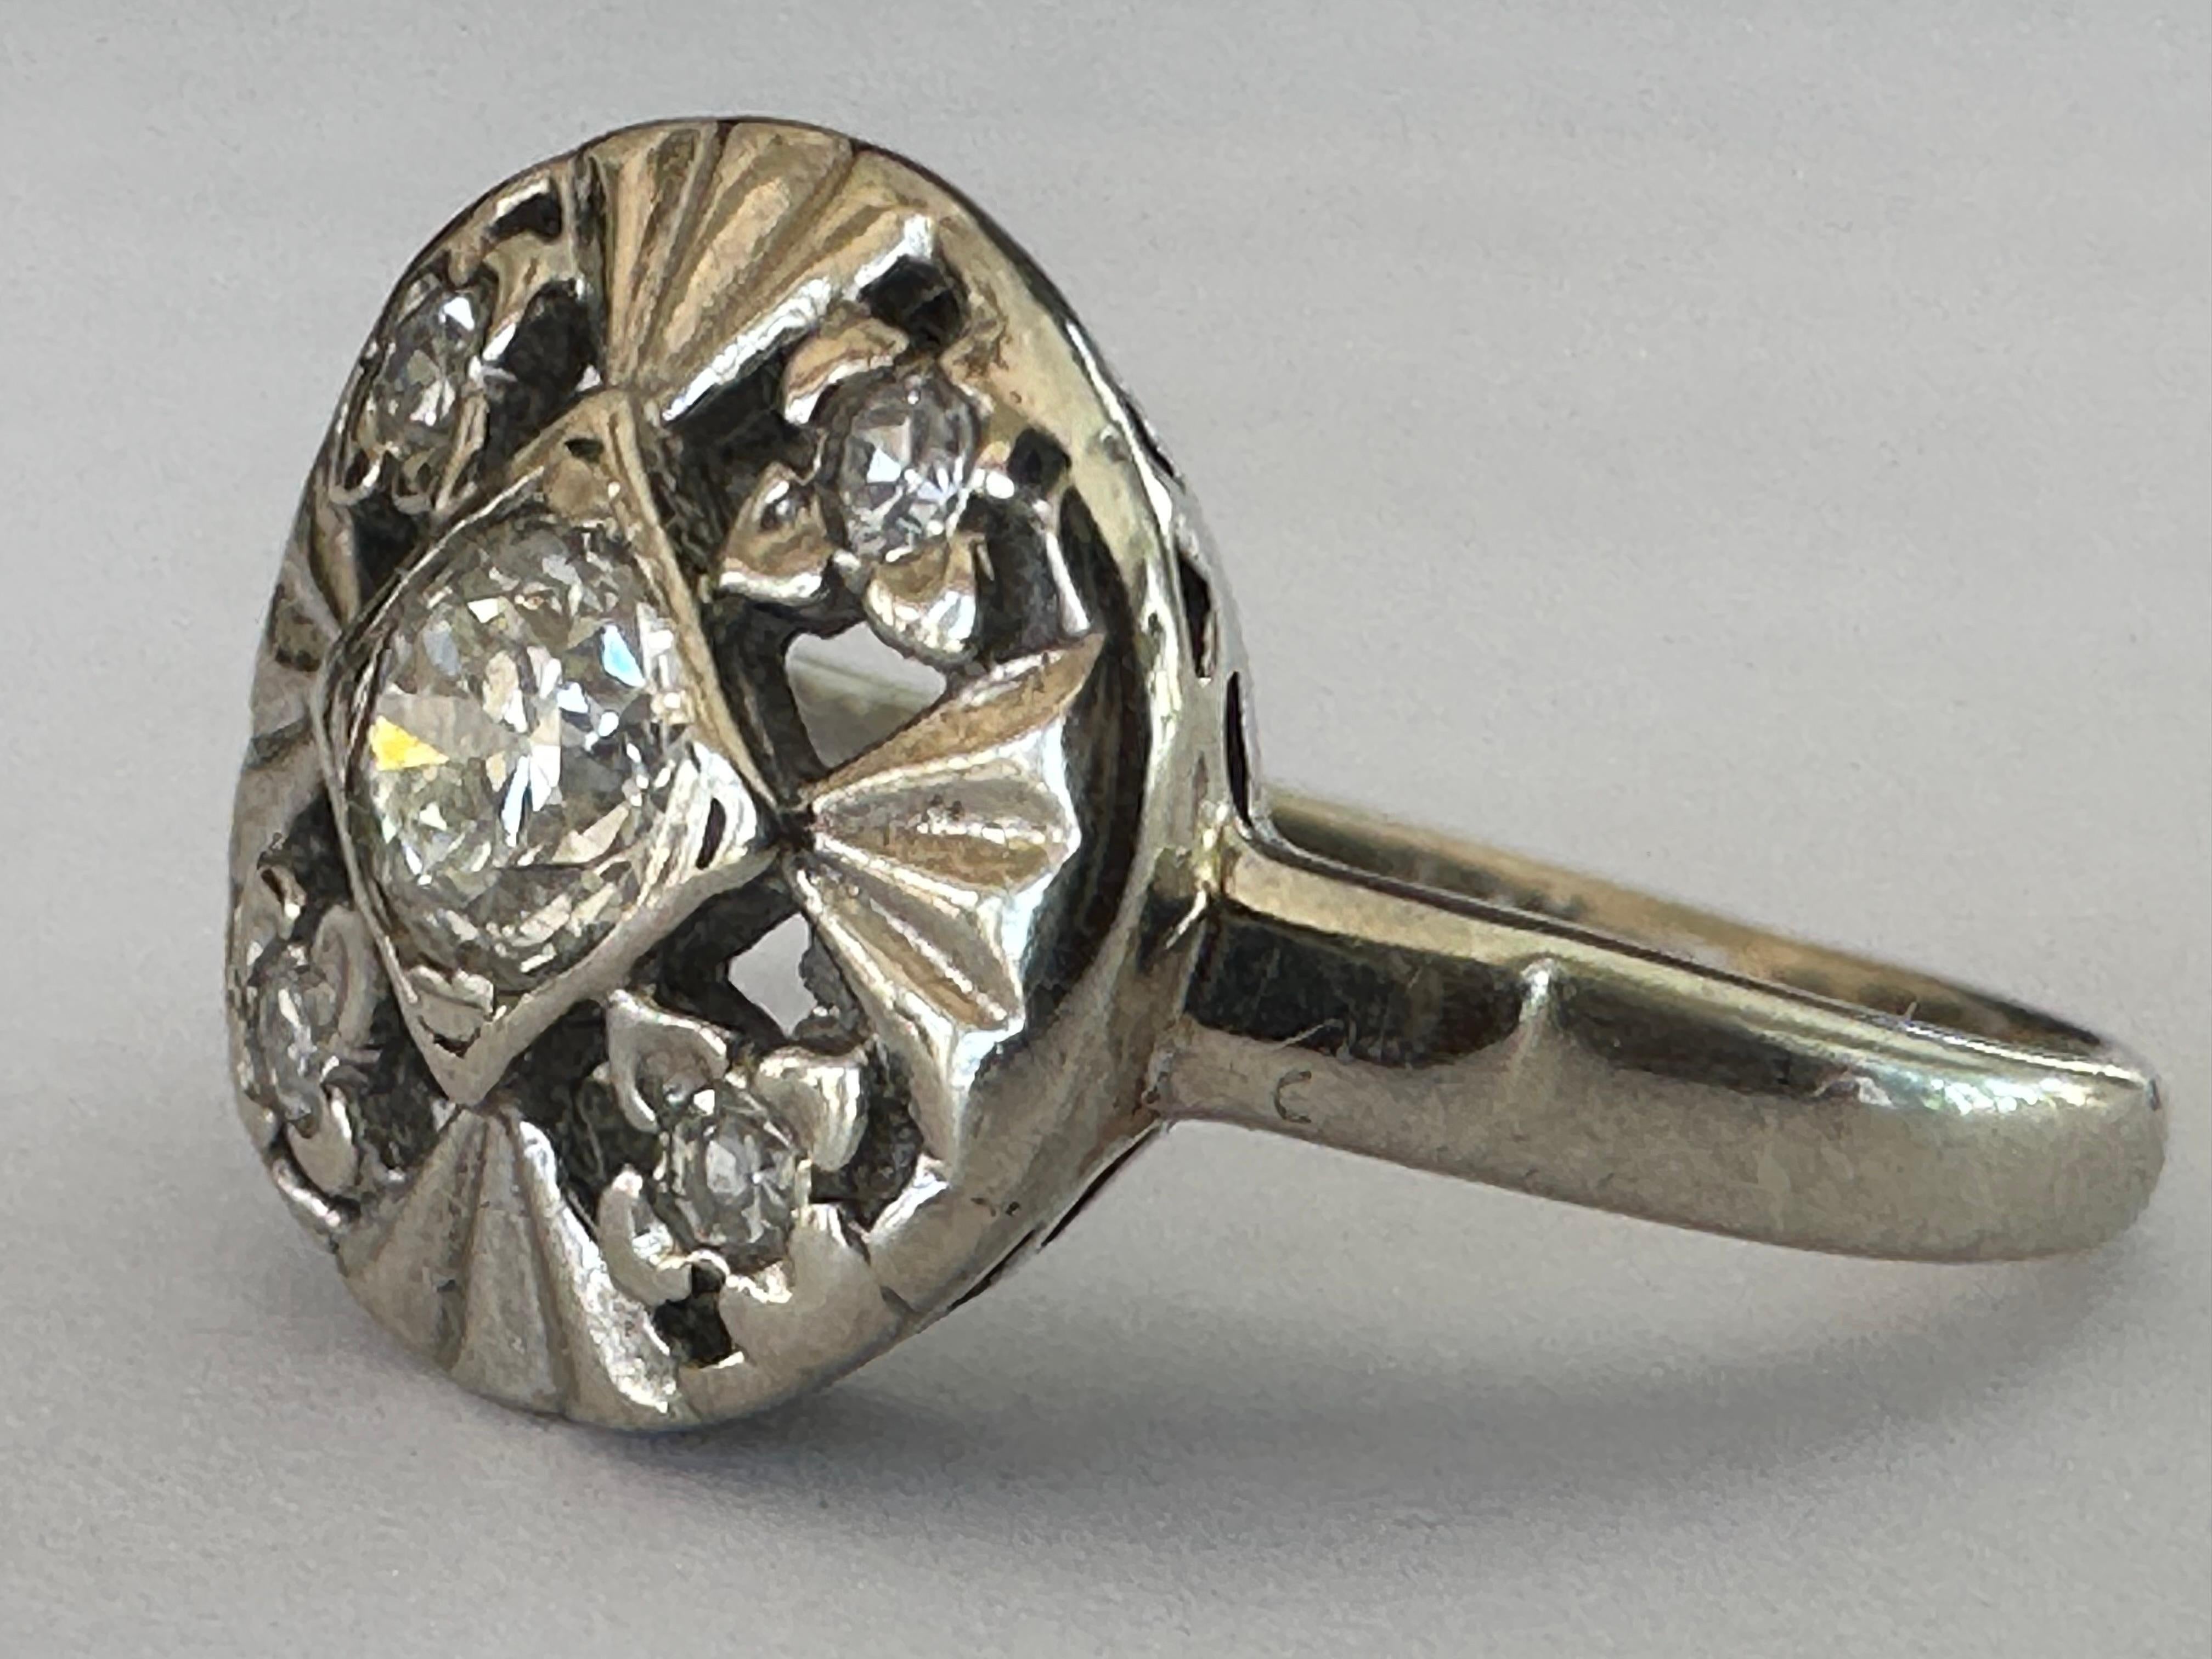 Crafted in the 1930-40s, this late Art Deco round dinner ring sparkles in all directions in a striking petal-like pattern, with four single cut diamonds radiating outward from an Old European cut center stone measuring approximately 0.28 carats, G